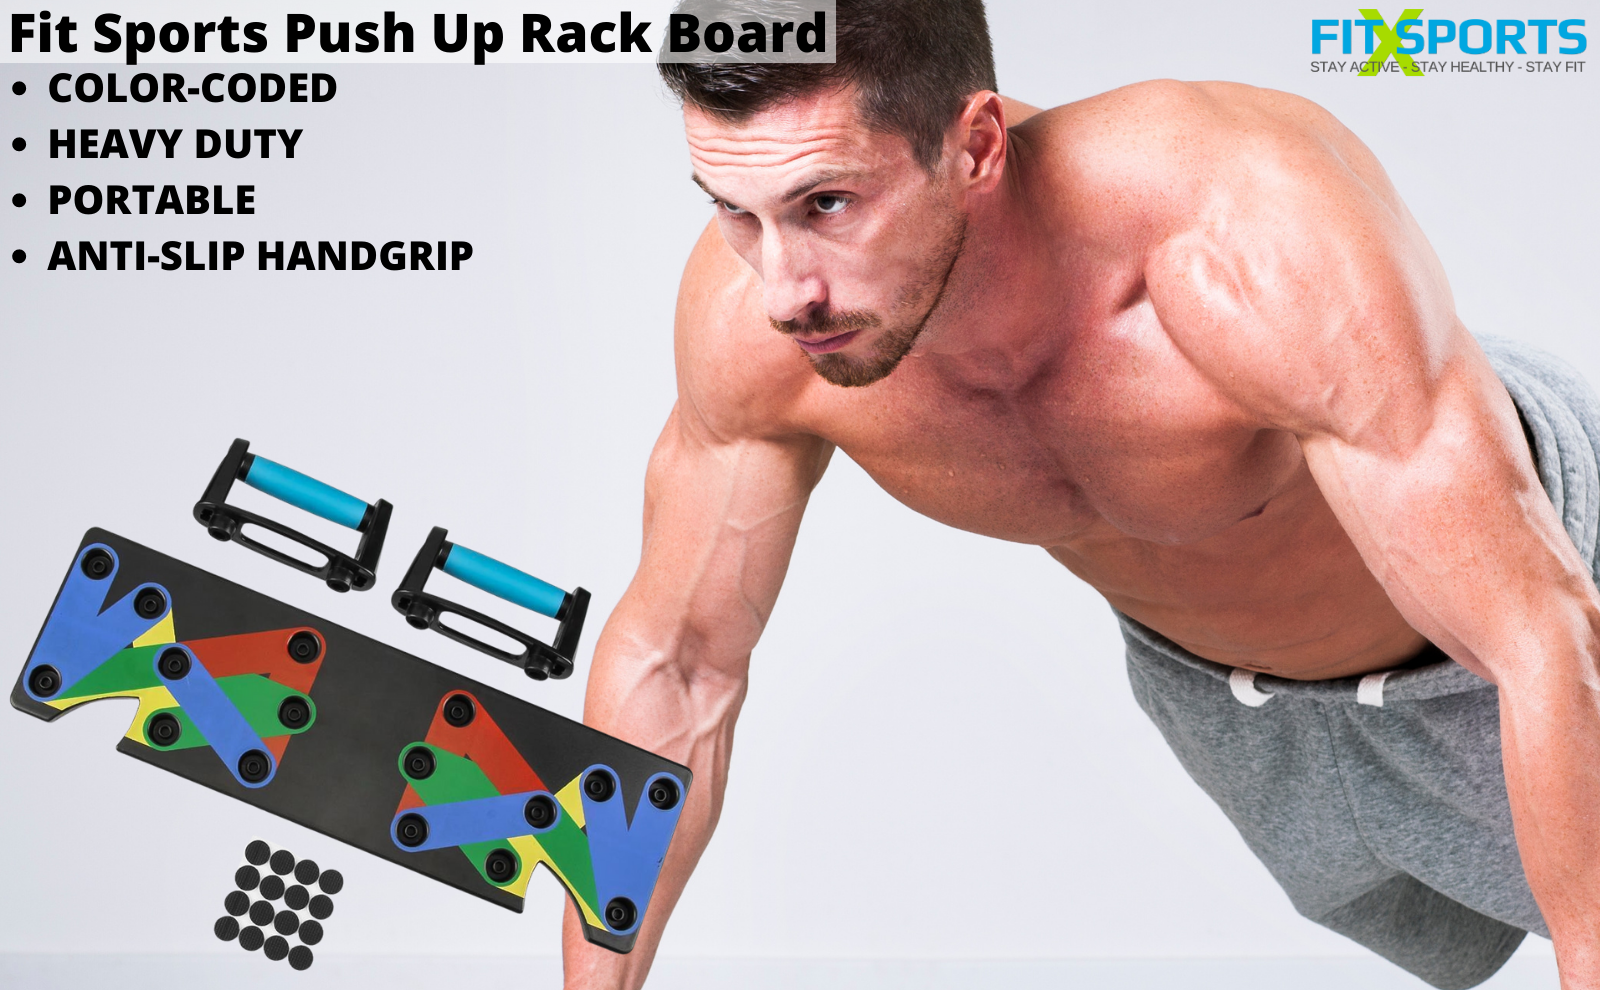 Push Up Board 9 In 1 Home Workout Equipment Multi-Functional Push Up System Fitness Chest Muscle Exercise Burn Fat Strength Training